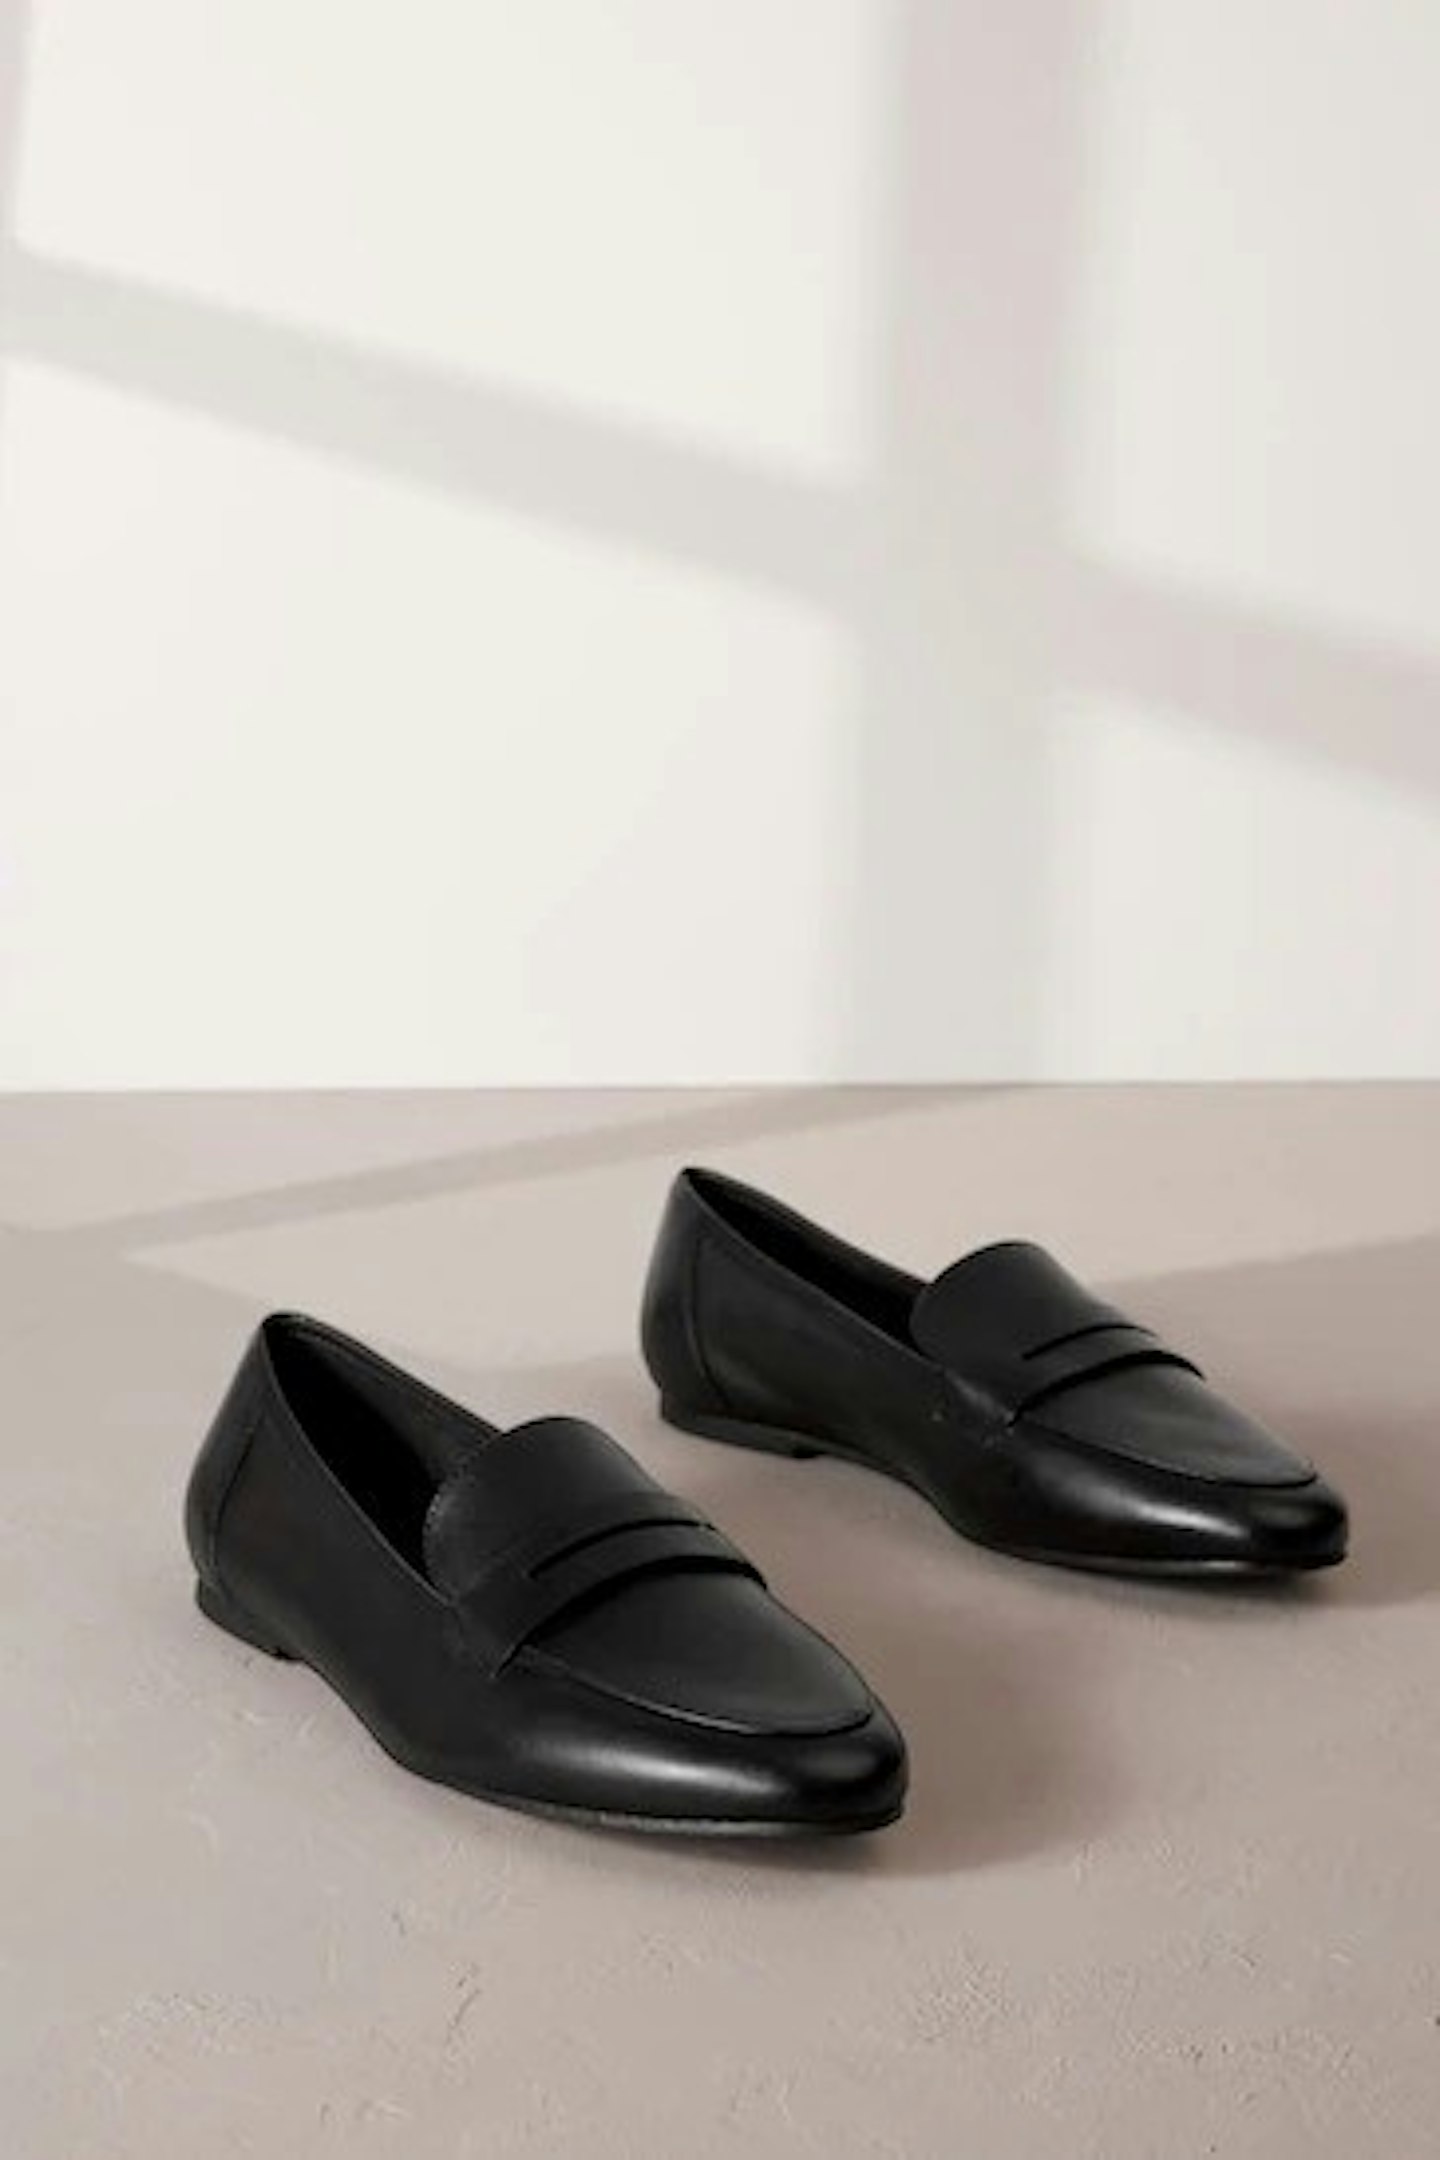 Next, Signature Leather Slim Sole Loafers